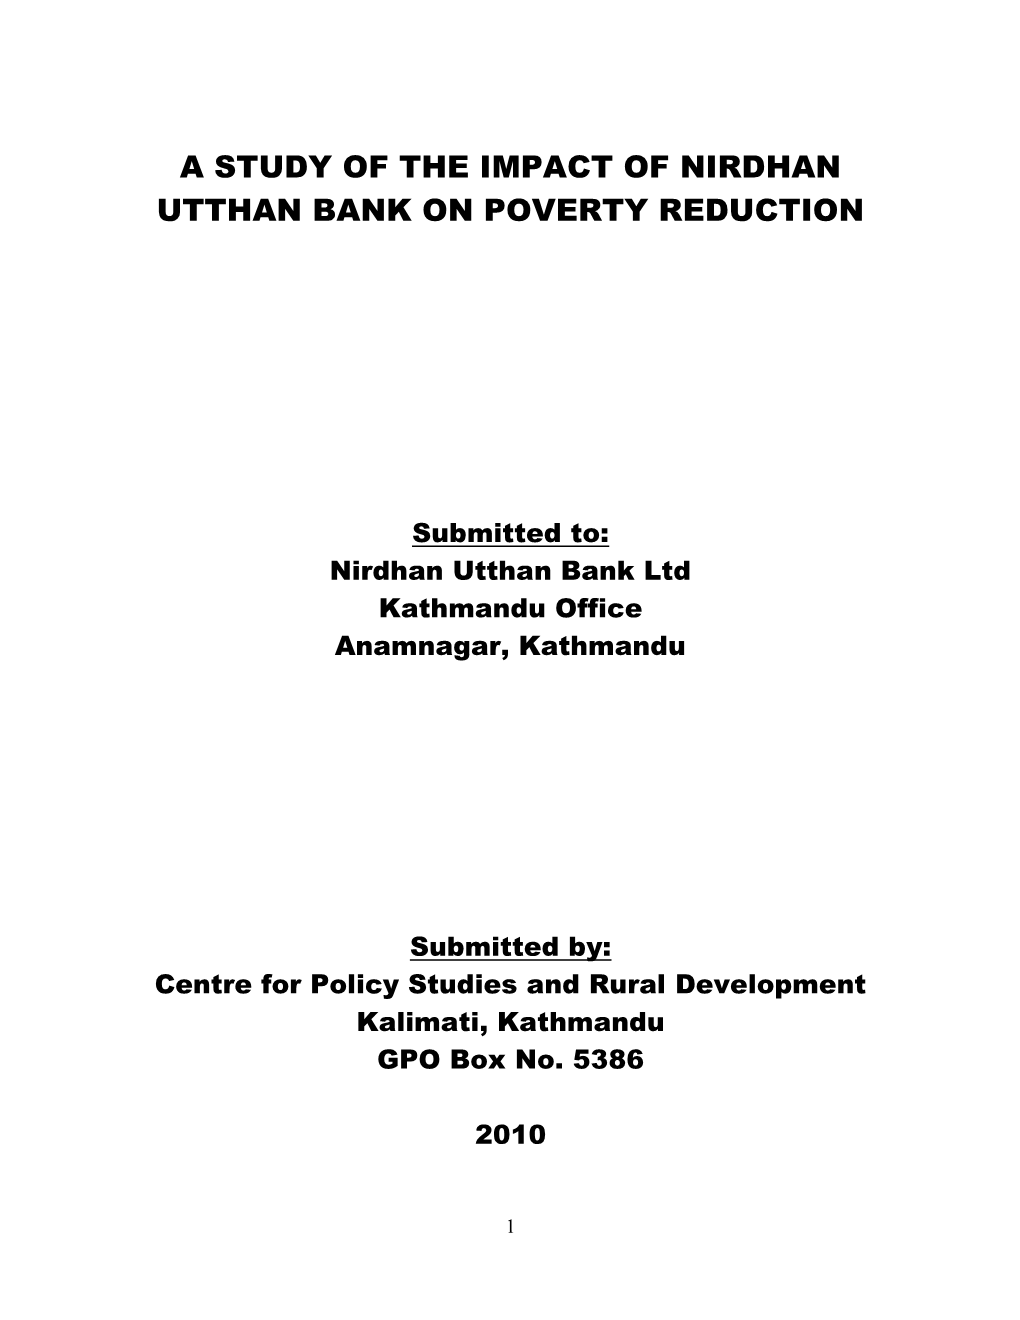 A Study of the Impact of Nirdhan Utthan Bank on Poverty Reduction